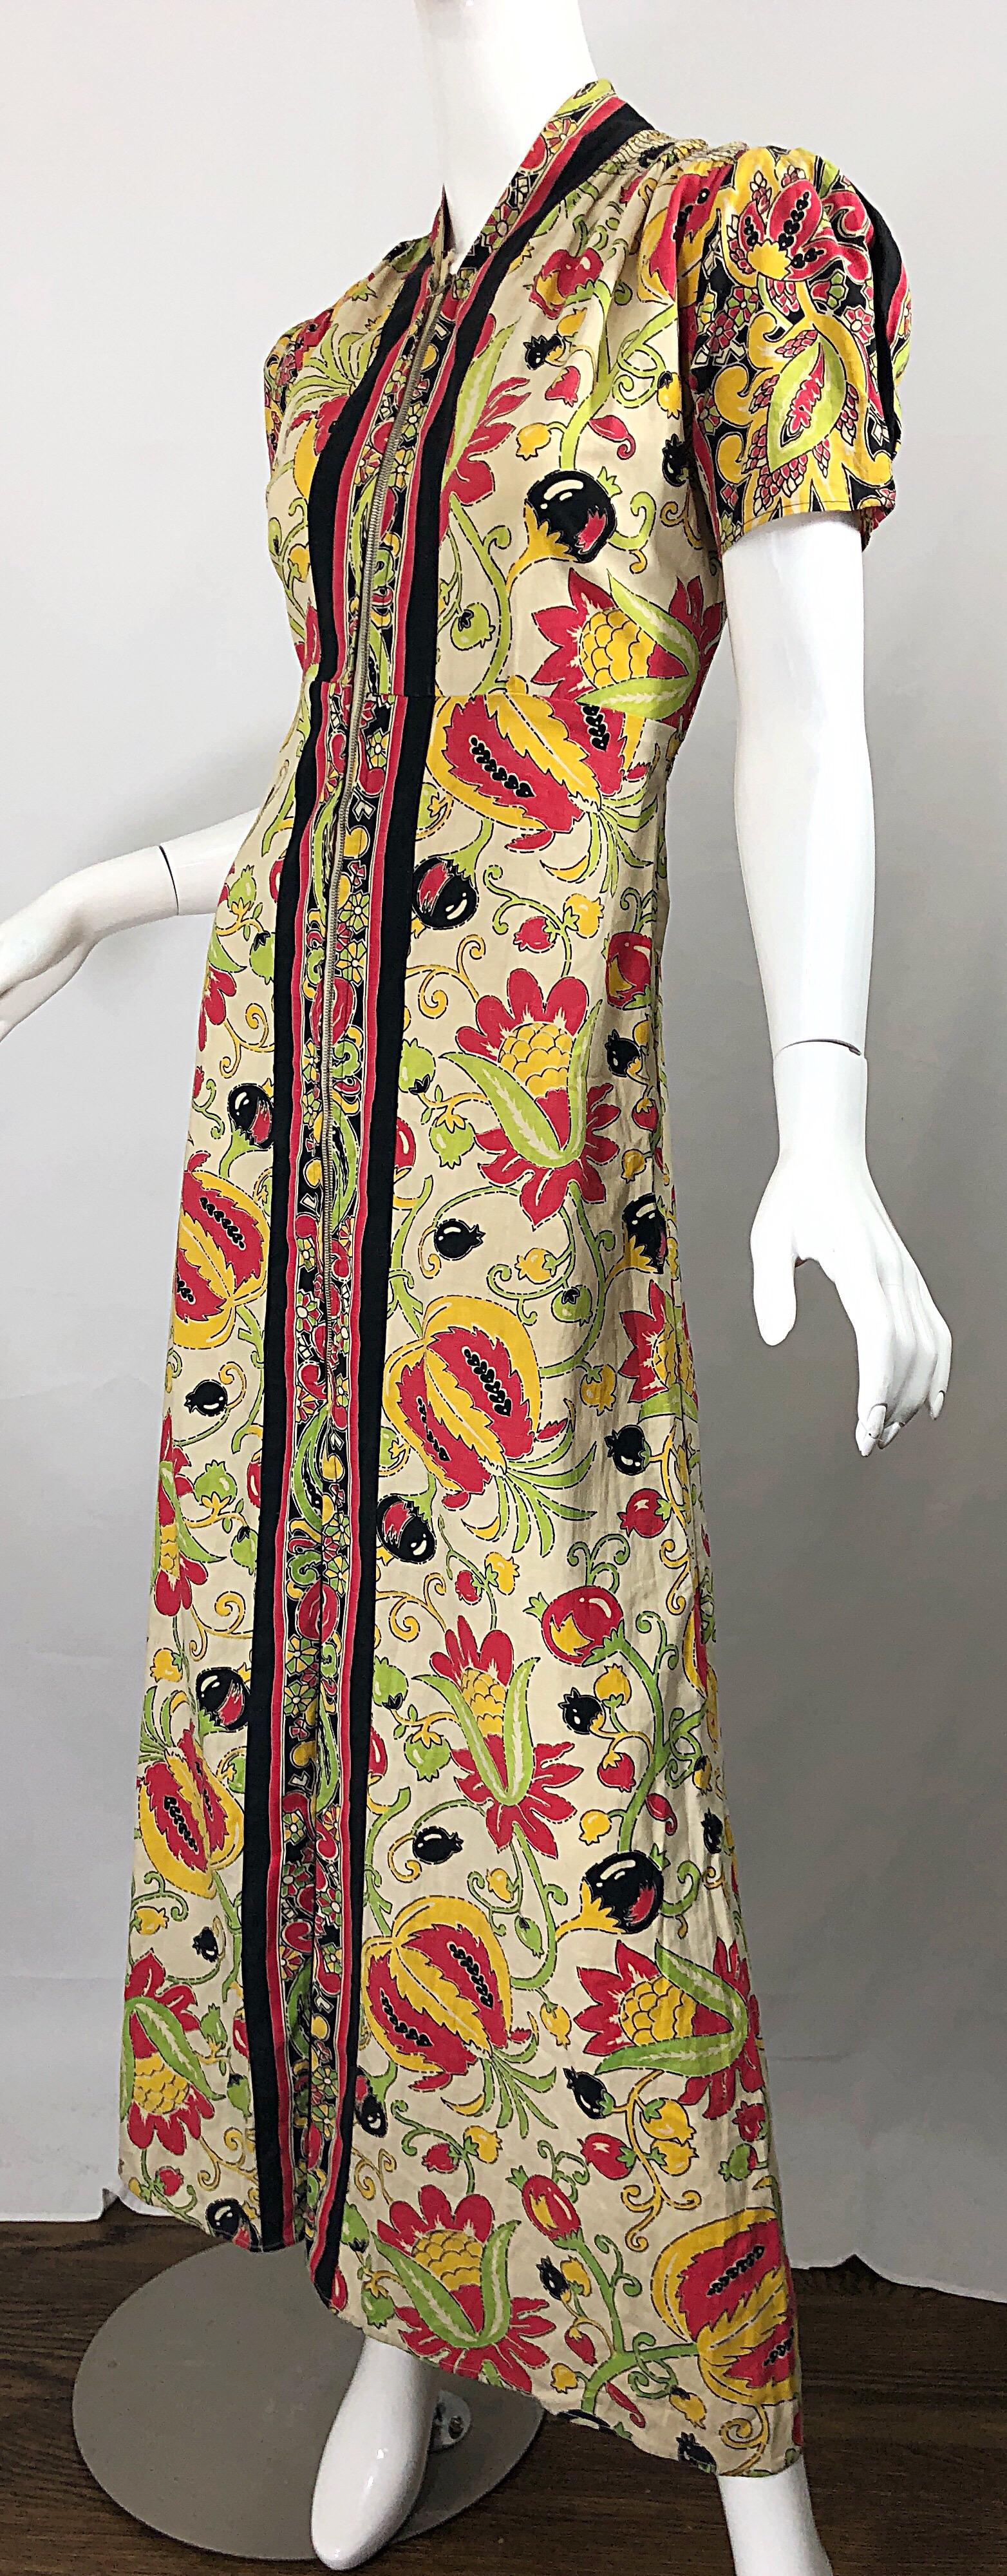 Amazing 1940s Botanical Asian Inspired Paisley Cotton + Linen 40s Maxi Dress For Sale 3